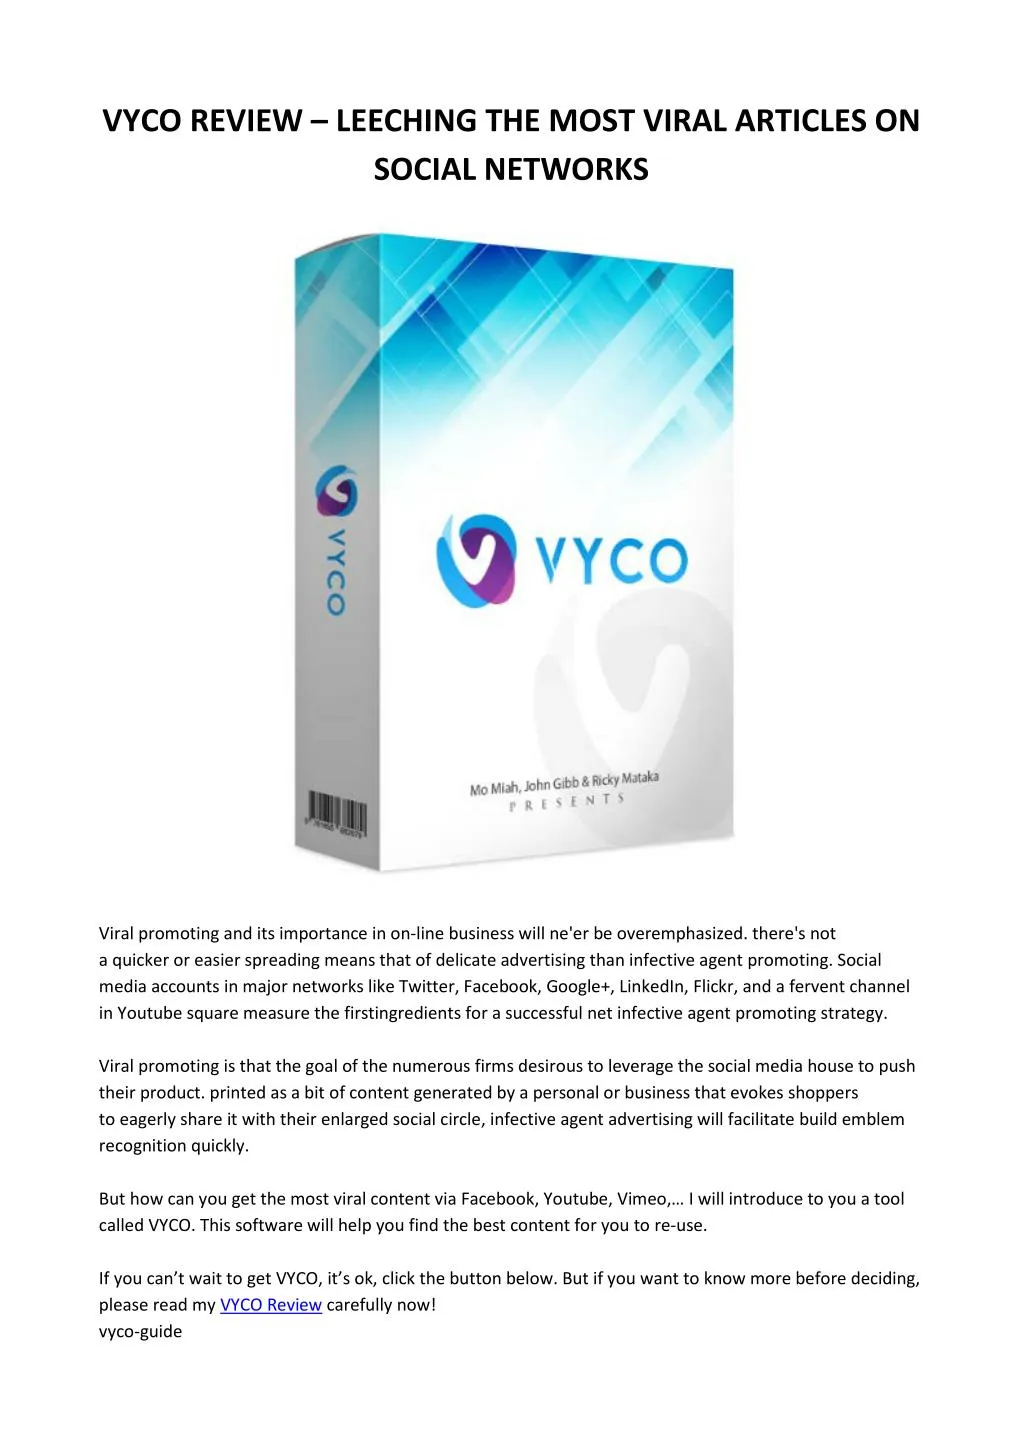 vyco review leeching the most viral articles